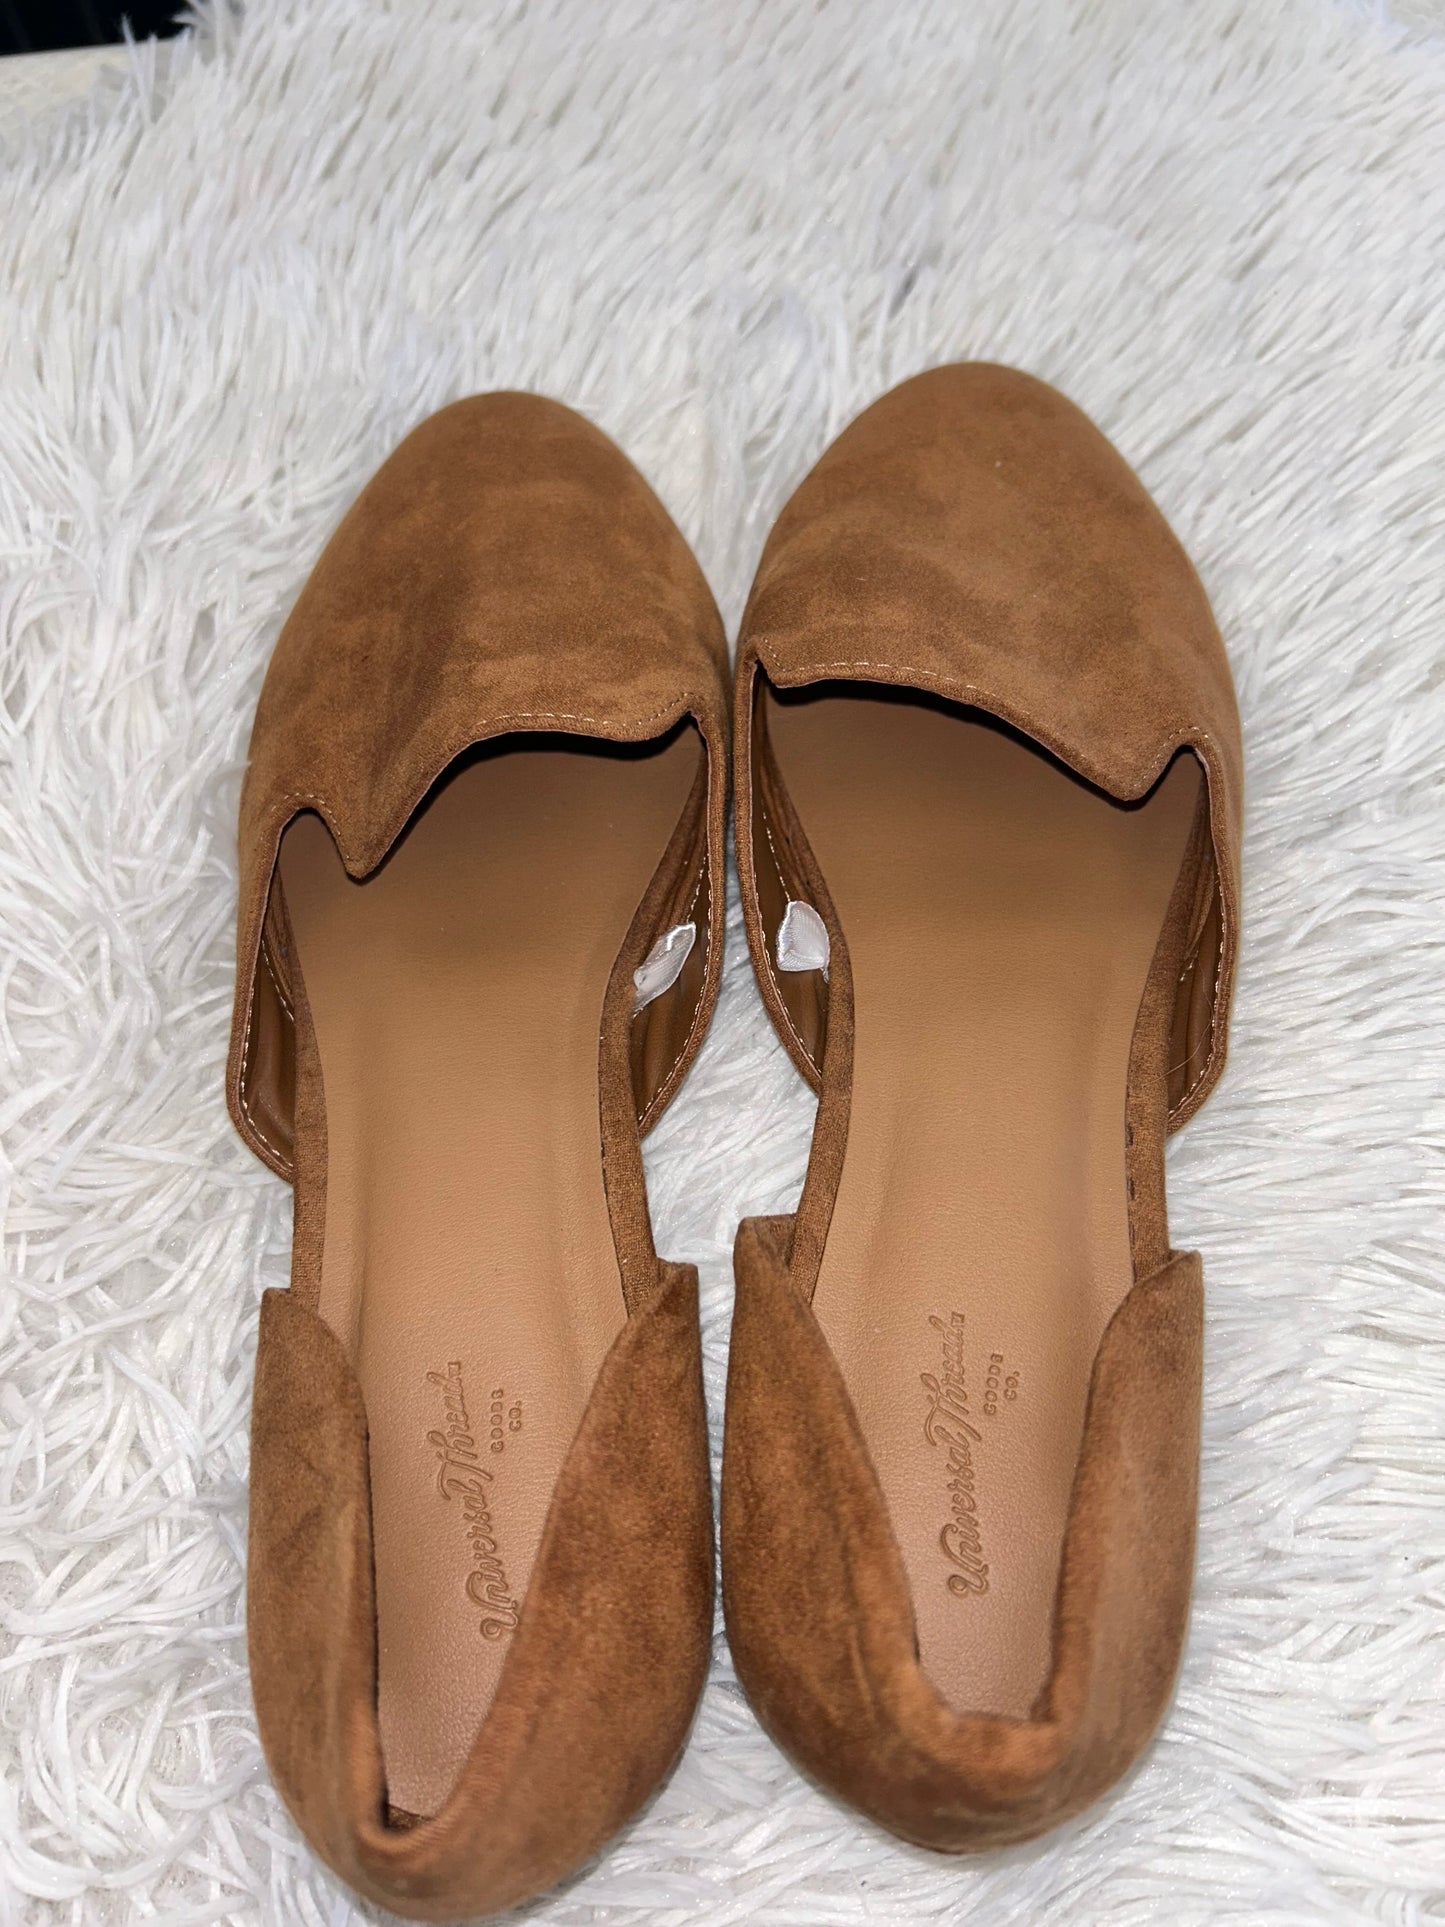 Shoes Flats D Orsay By Universal Thread  Size: 9